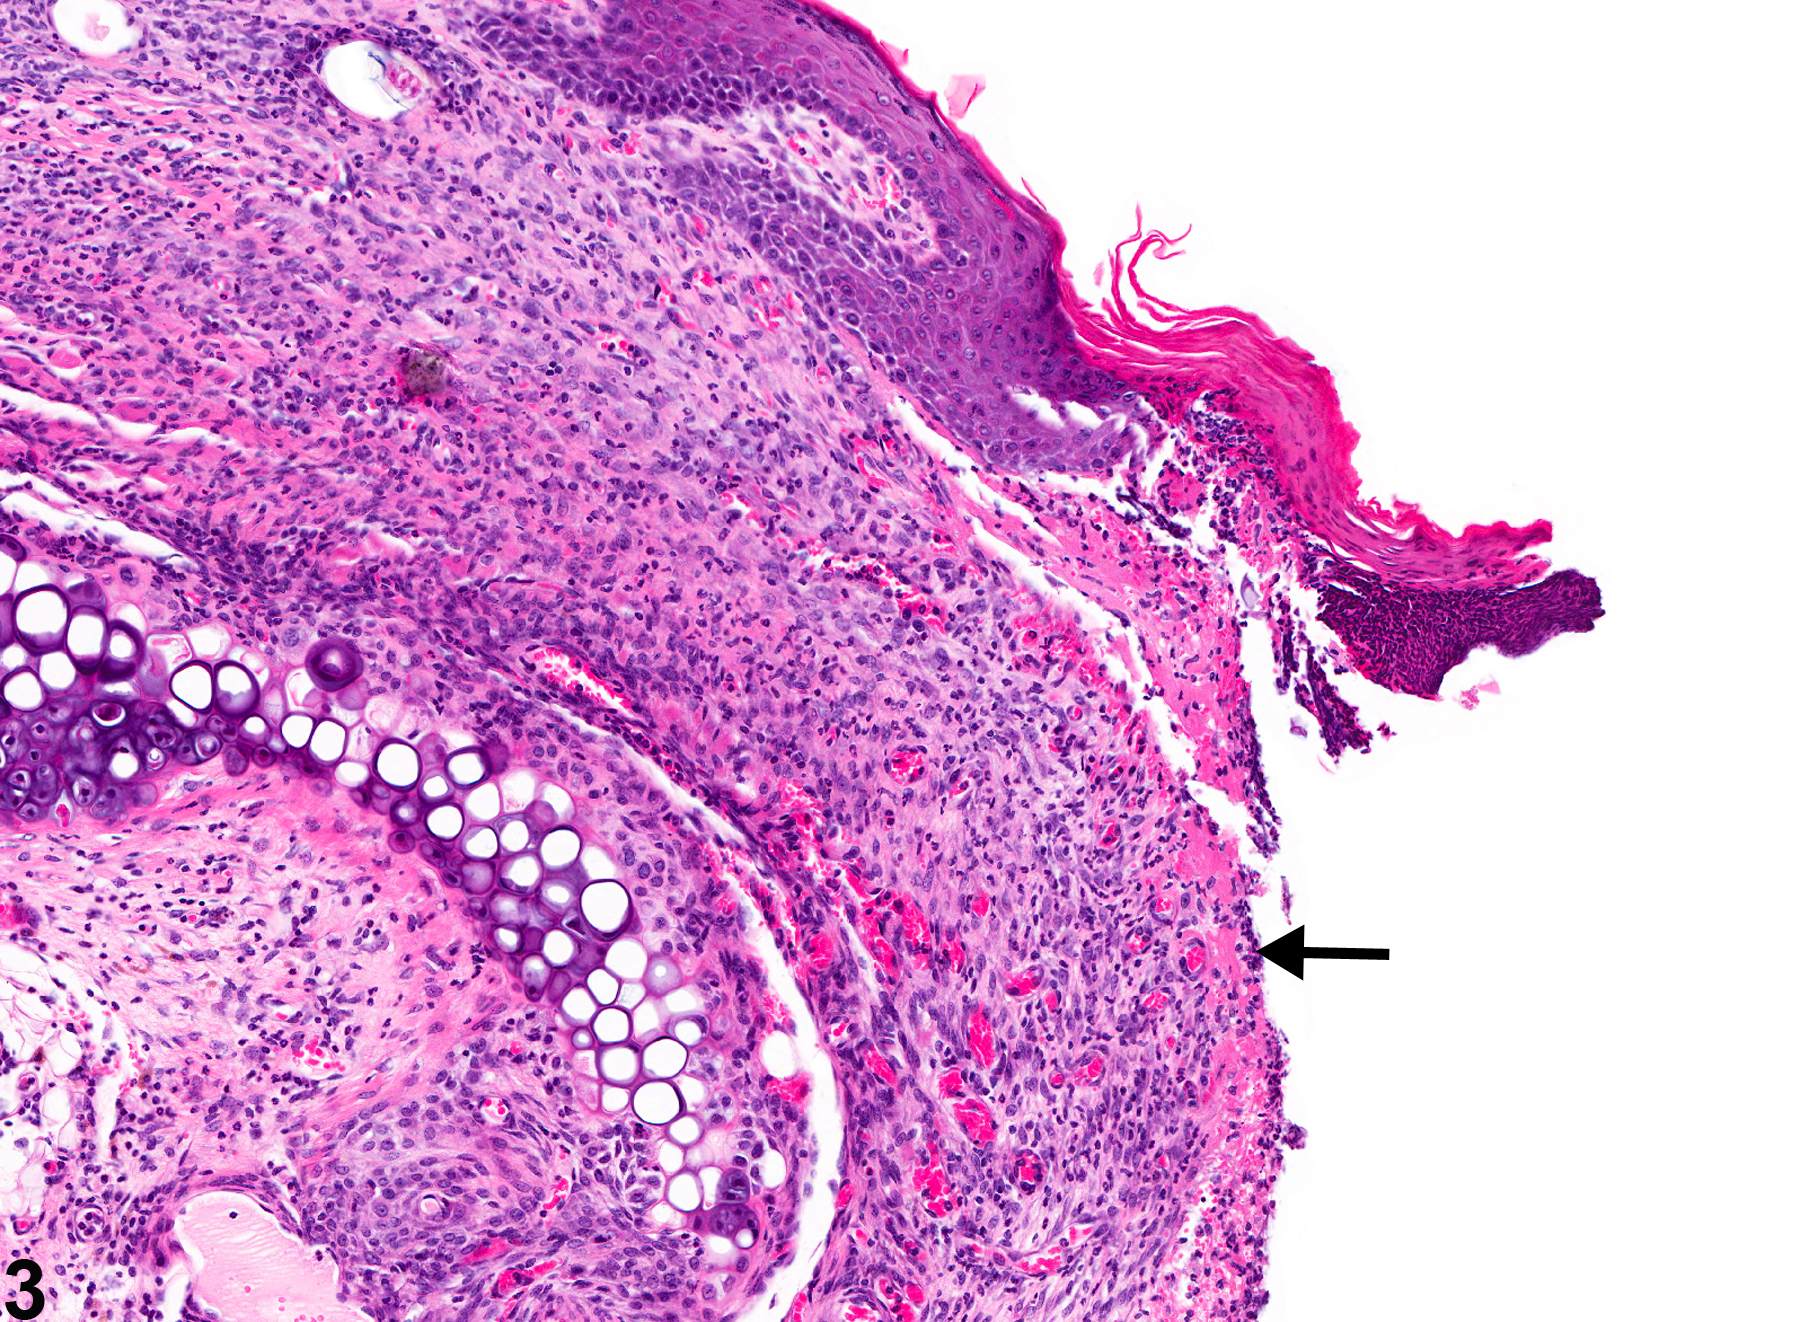 Image of ulcer, erosion in the ear from a male Swiss CD-1 mouse in a chronic study